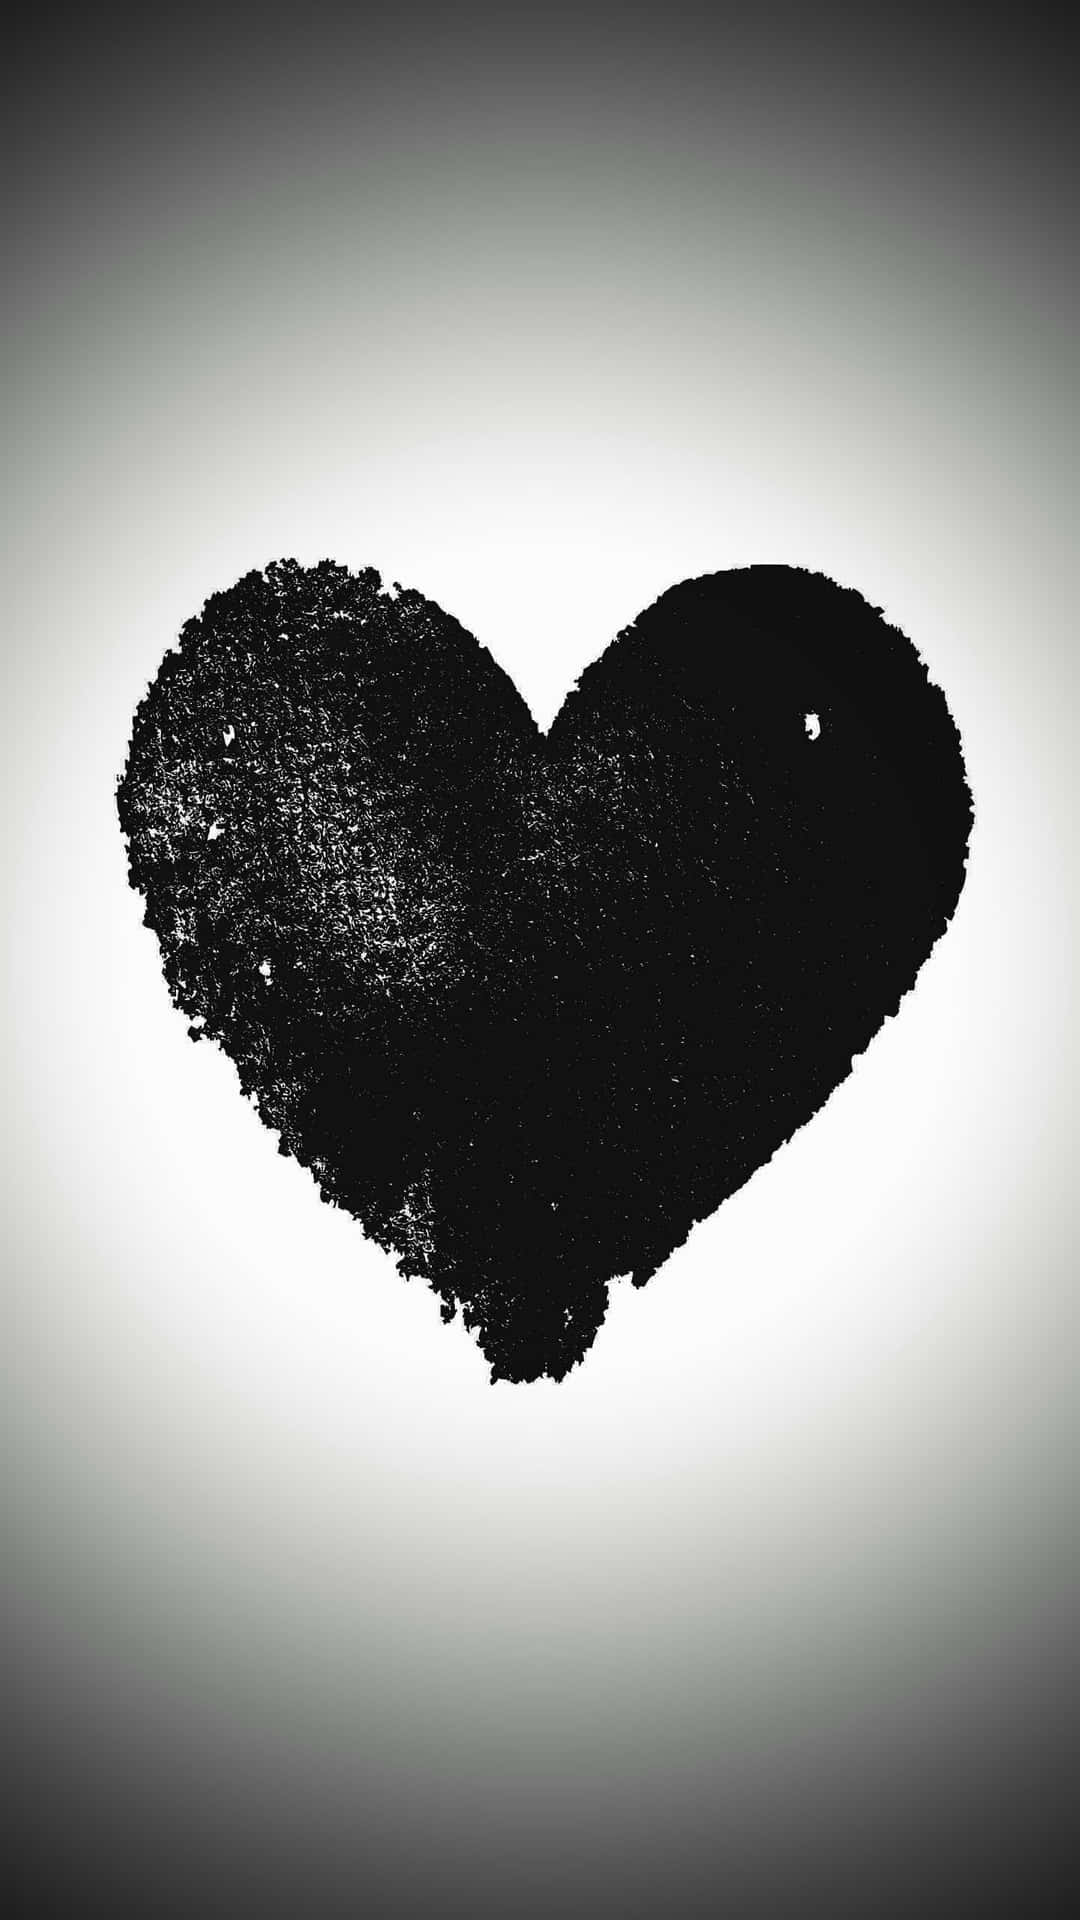 Full of darkness and emotion, this black heart has a story to tell.